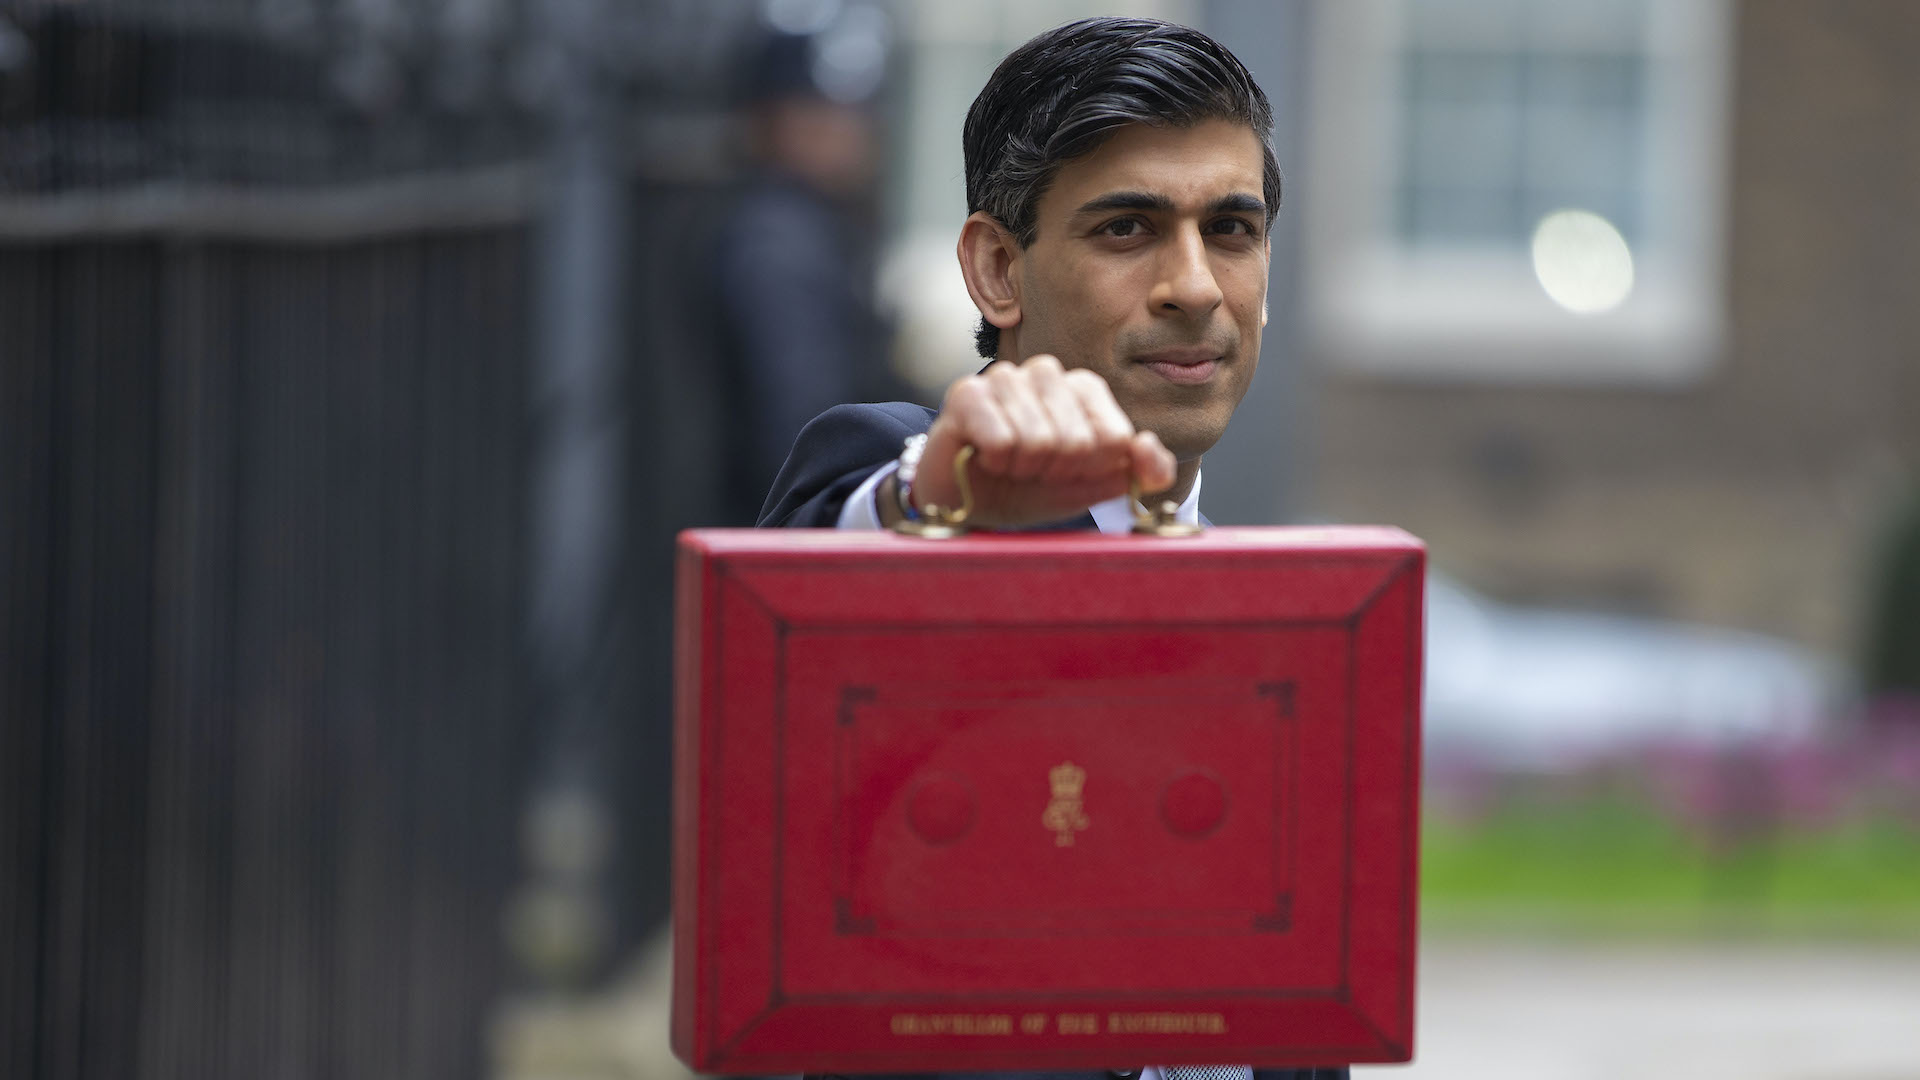 Chancellor Rishi Sunak will deliver his Budget later this month. Image credit: HM Treasury/Flickr